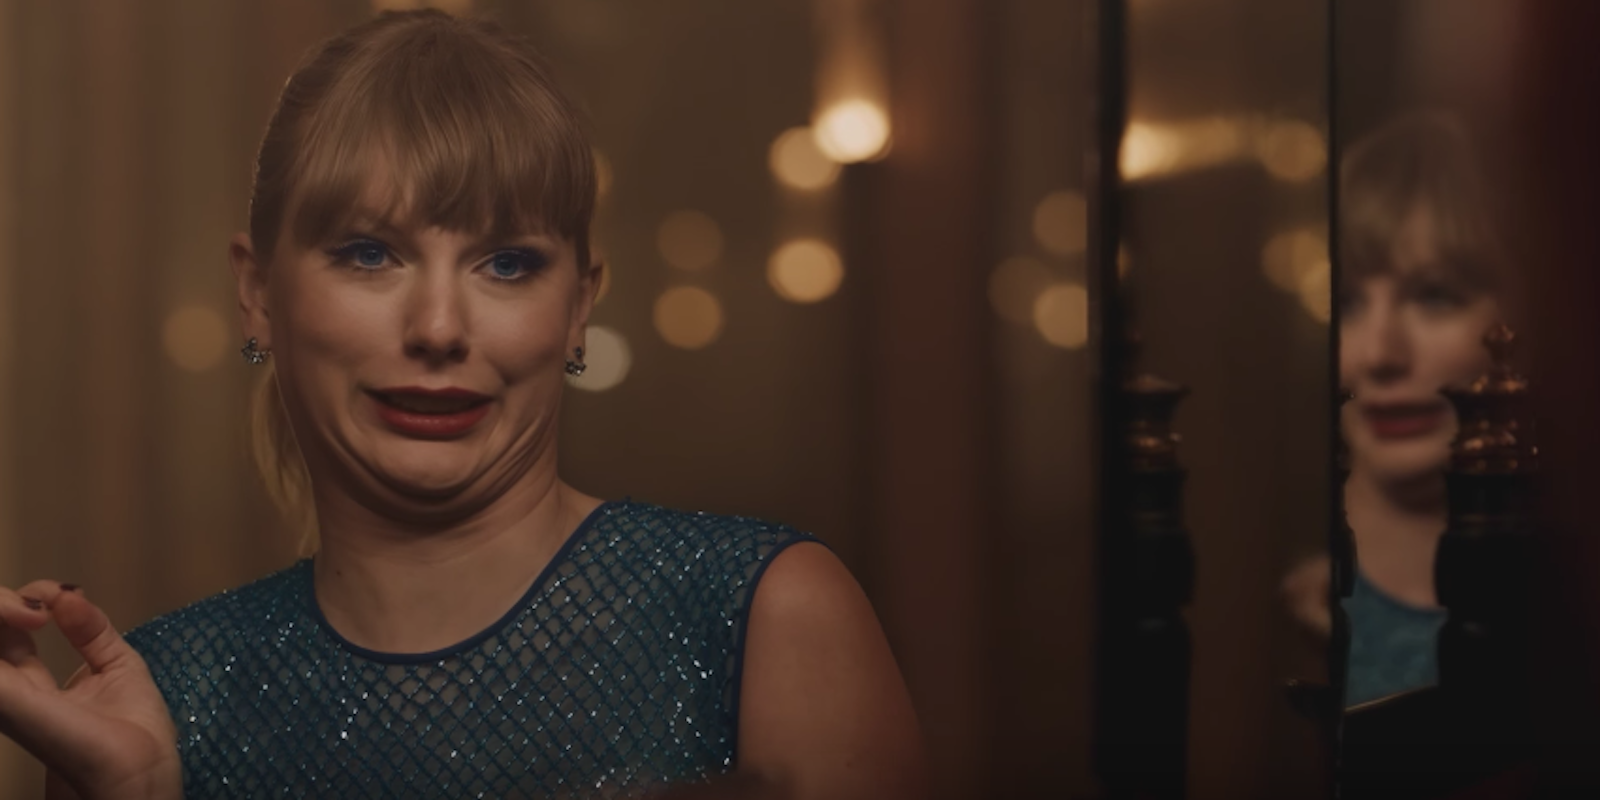 Taylor Swift makes a goofy face in the mirror